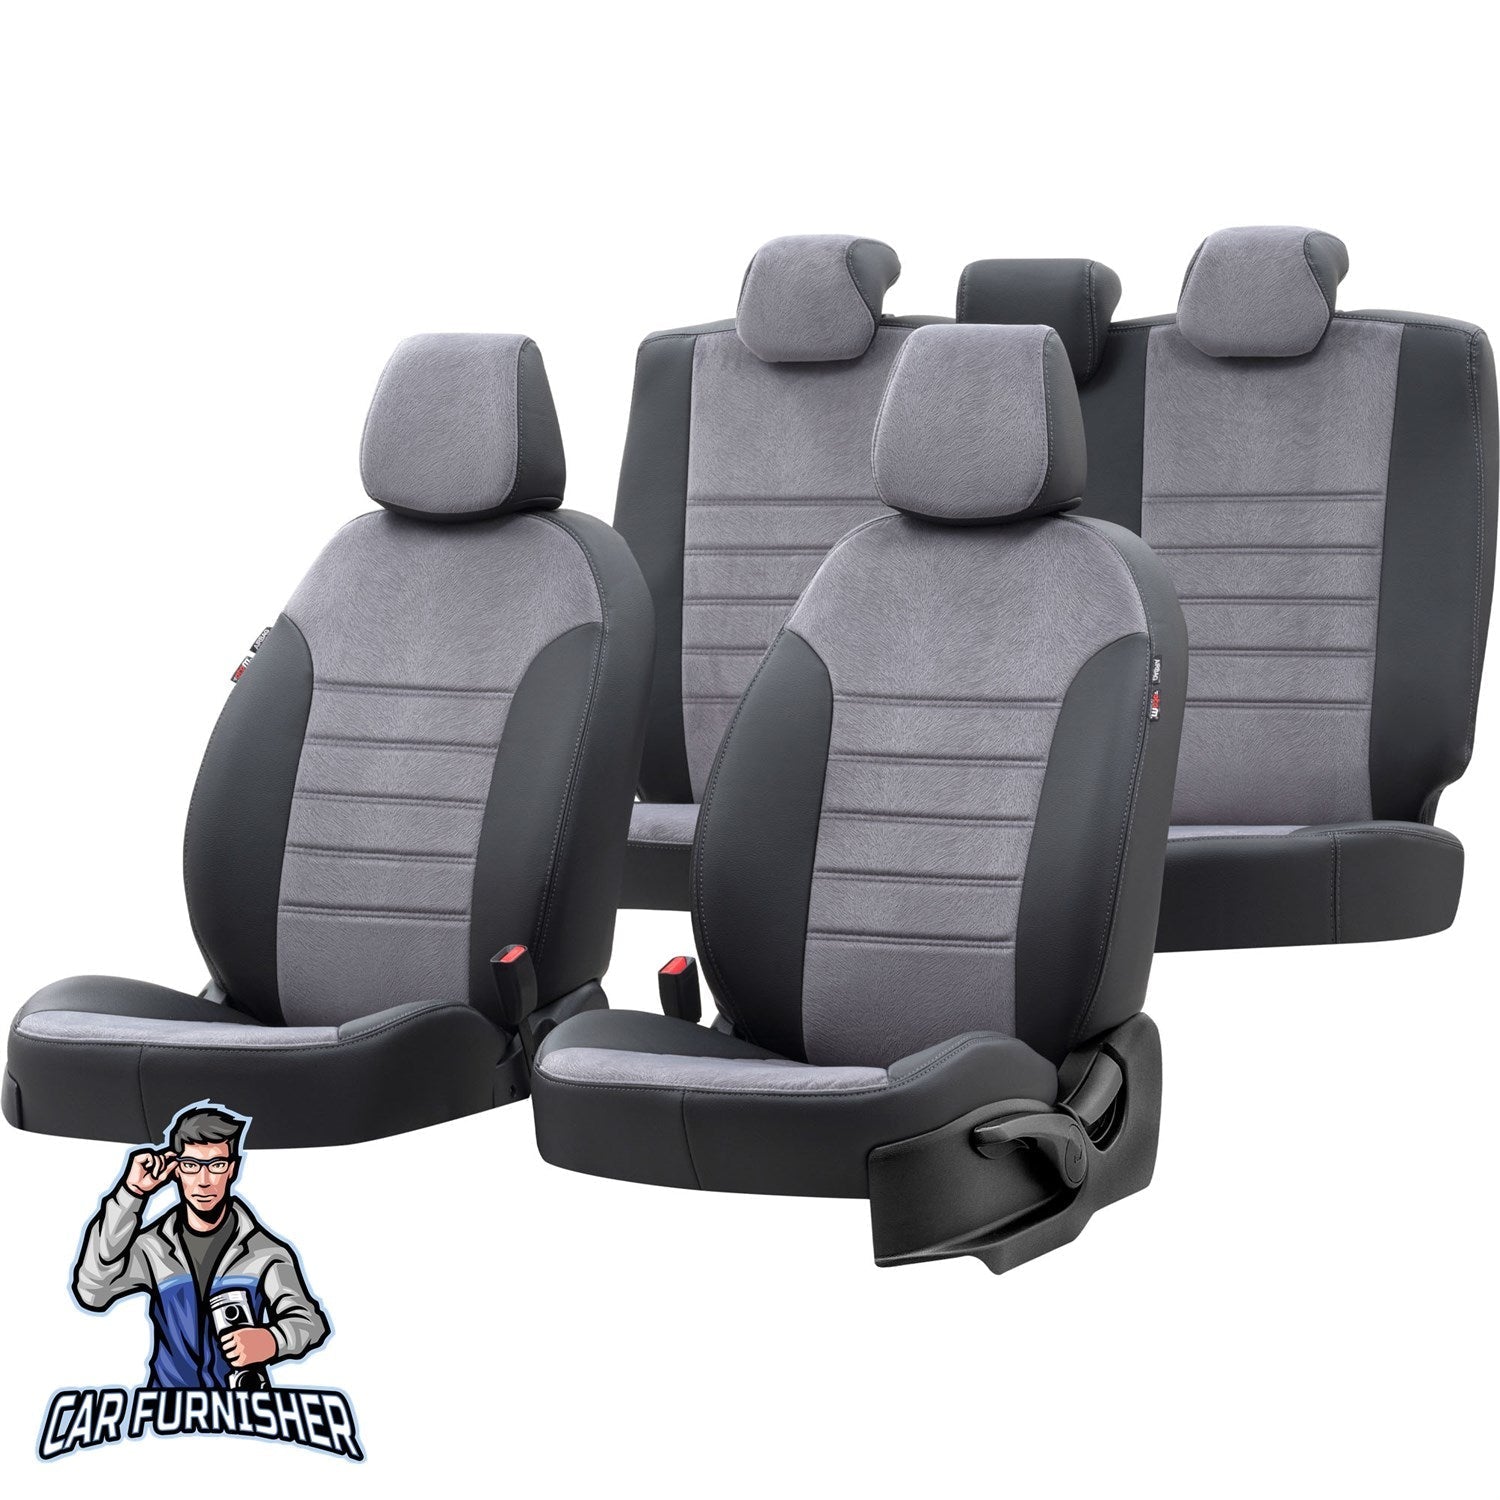 Renault Broadway Car Seat Covers 1983-2001 London Design Smoked Black Full Set (5 Seats + Handrest) Leather & Fabric